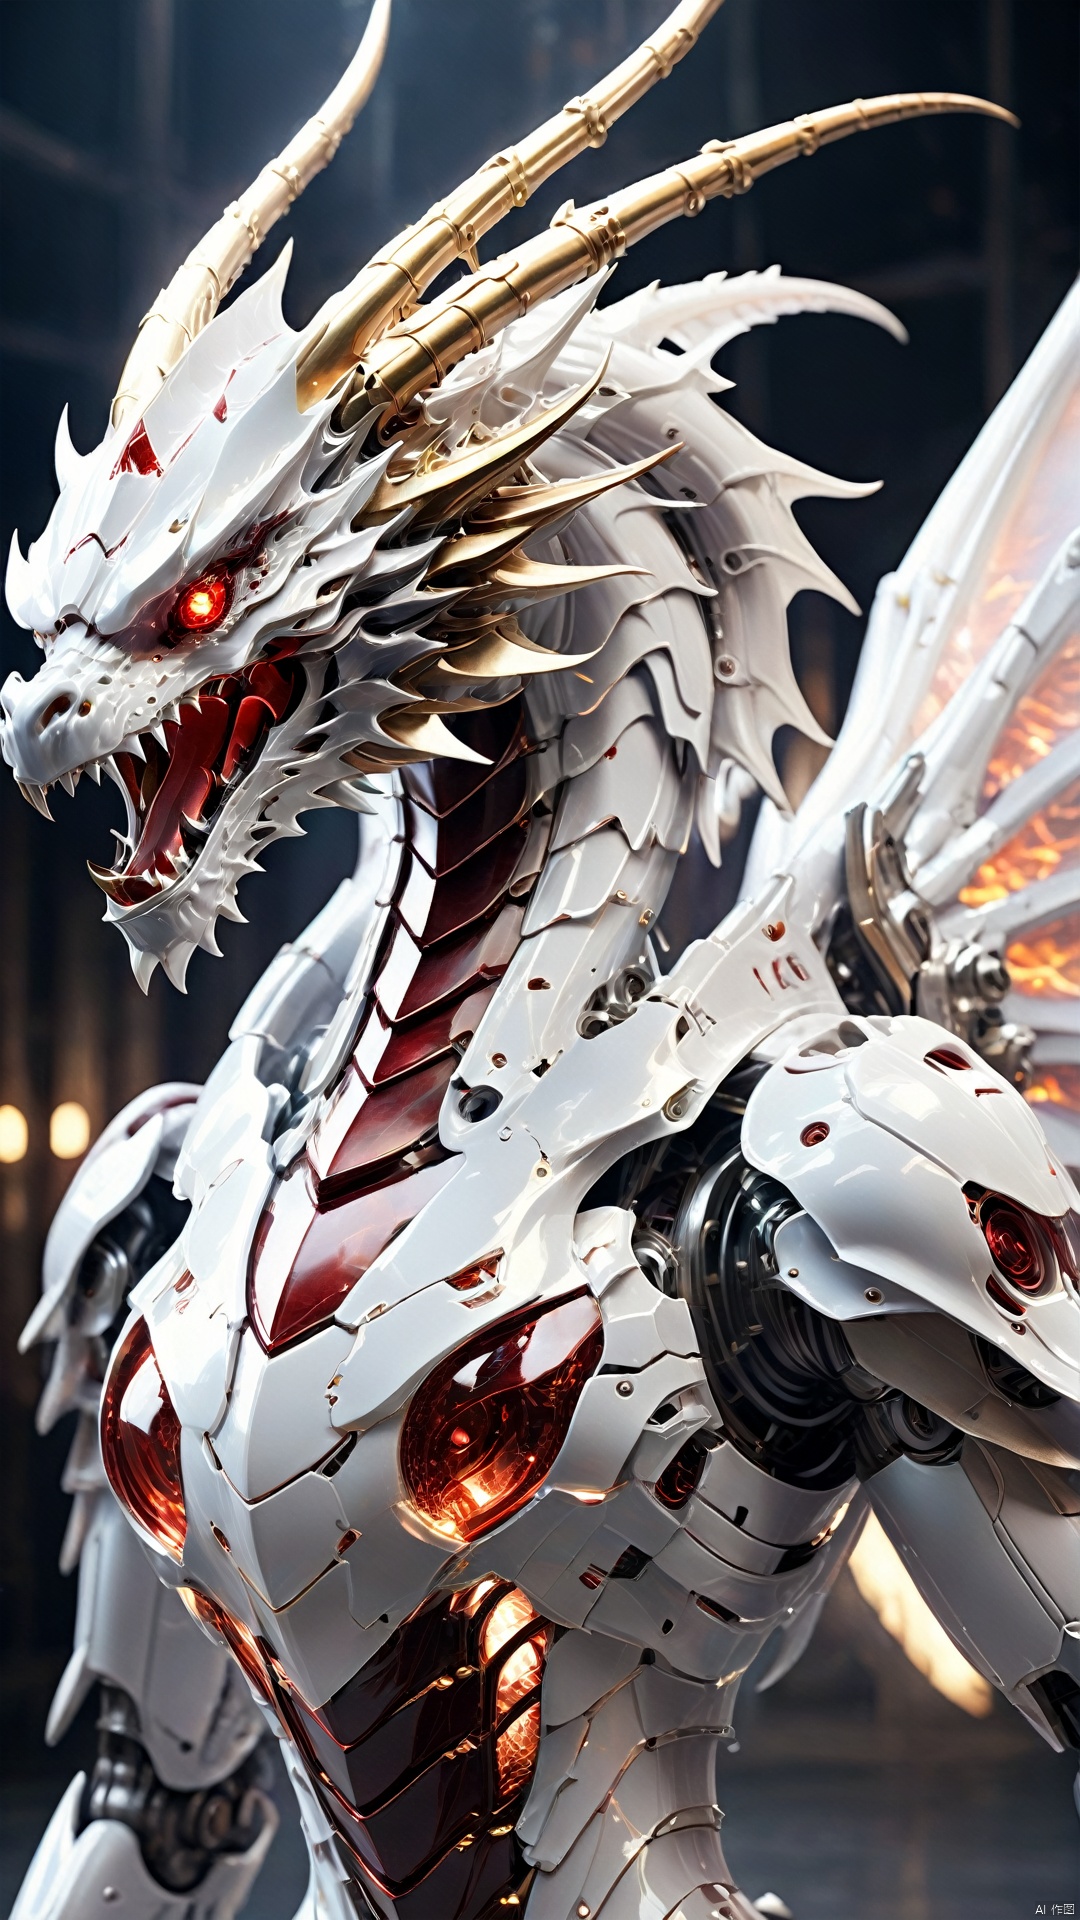  The mechanical dragon, about 70 meters tall, is covered in silver-gray armor, which is covered with fine lines that not only add beauty but also strengthen the armor. Its head is slender, with a pair of huge horns on top, which are sharp as knives and exude a strong majesty. Its eyes showed a deep red, like two hot gems, sparkle. On its neck, there are huge sheets of metal scales, each of which glows with a metallic sheen, enhancing the overall visual effect.
The wings of the mechanical dragon were up to 100 meters wide when they were spread out, and the wings were covered with steel feathers, each of which was like a precise blade, shining sharply in the sunlight. Its tail is slender and powerful, with sharp ends that form perfect symmetry with its head.
The most striking thing is the flame burning all over the mechanical dragon. These flames are not real flames, but light effects stimulated by their internal energy systems. These light effects make the mechanical dragon shine like a phoenix of fire when flying, giving it a sense of infinite power.
1 dragon,masterpiece,enormous,
render,technology, (best quality) (masterpiece), (highly detailed), 4K,Official art, unit 8 k wallpaper, ultra detailed, masterpiece, best quality, extremely detailed, dynamic angle,atmospheric,highdetail,exquisitefacialfeatures,futuristic,sciencefiction,CG, bailing_monster, wujie, d6-mecha